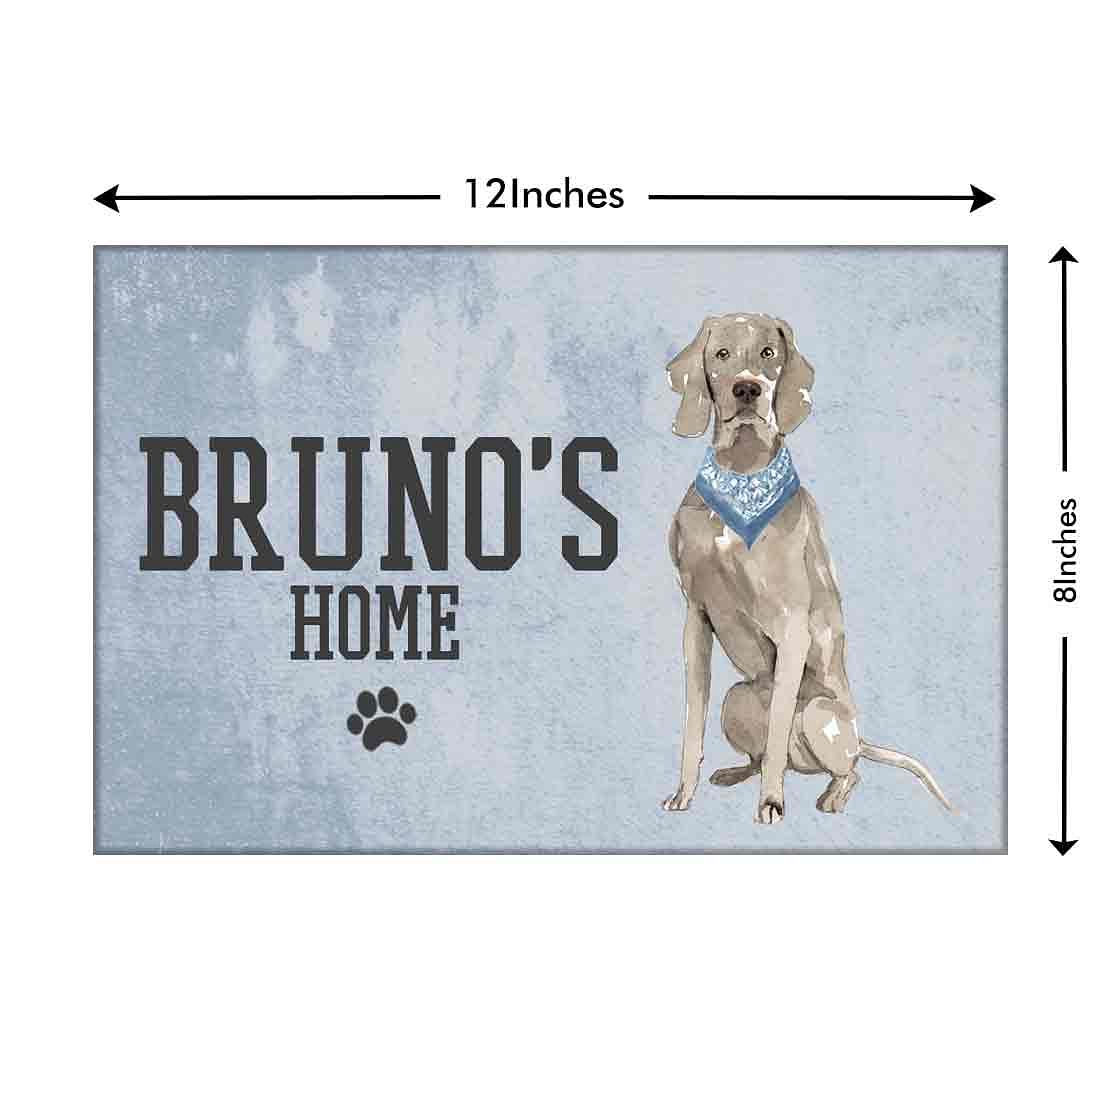 Personalized Dog Name Plate for Main Gate -Silly Weimaraner Nutcase